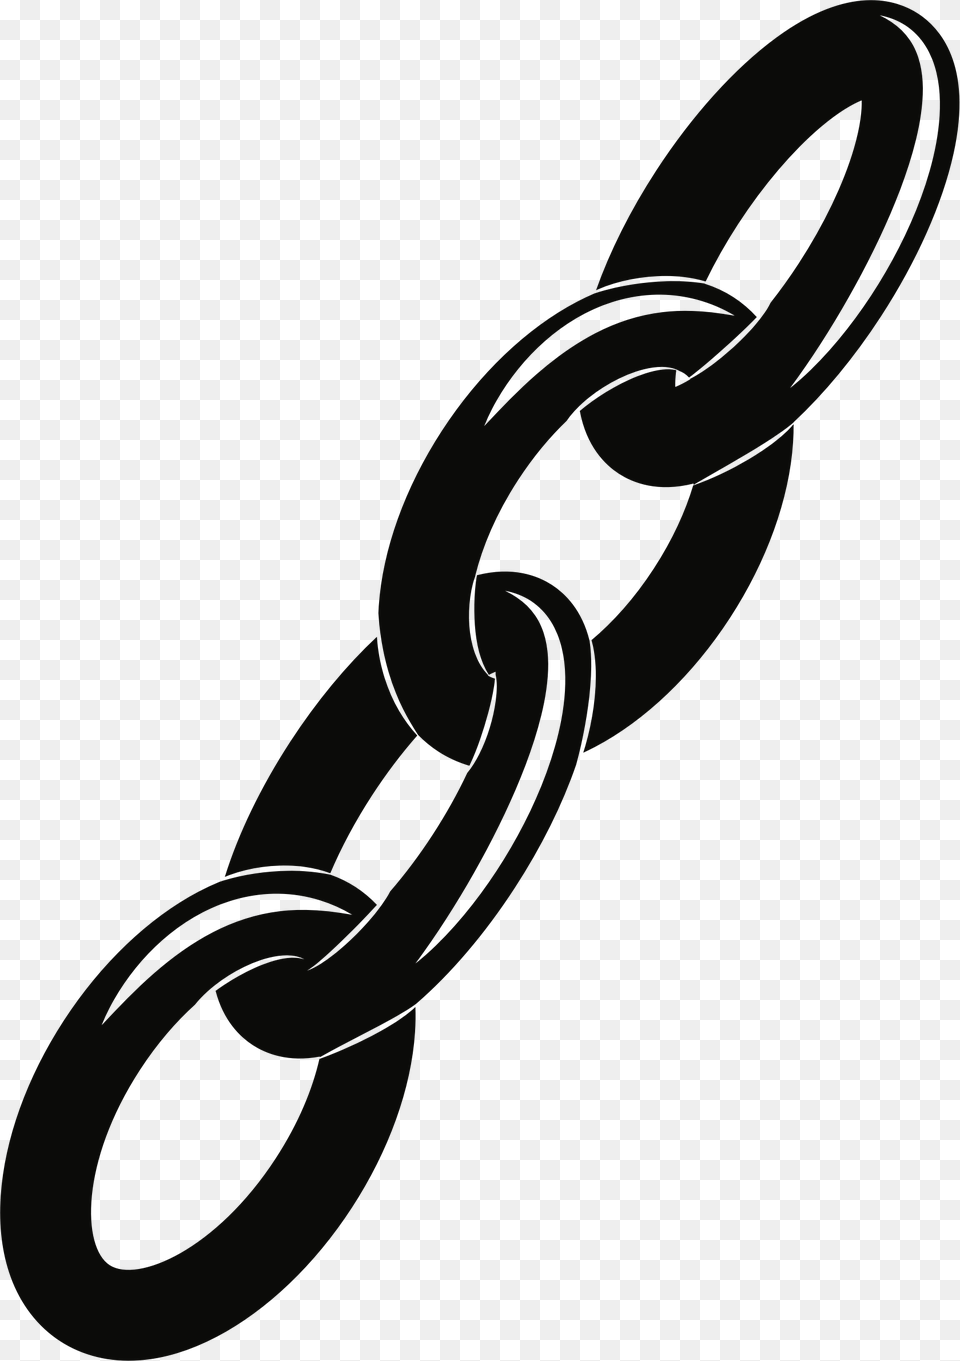 Transparent Chain Clipart Clip Art Of Chains Png